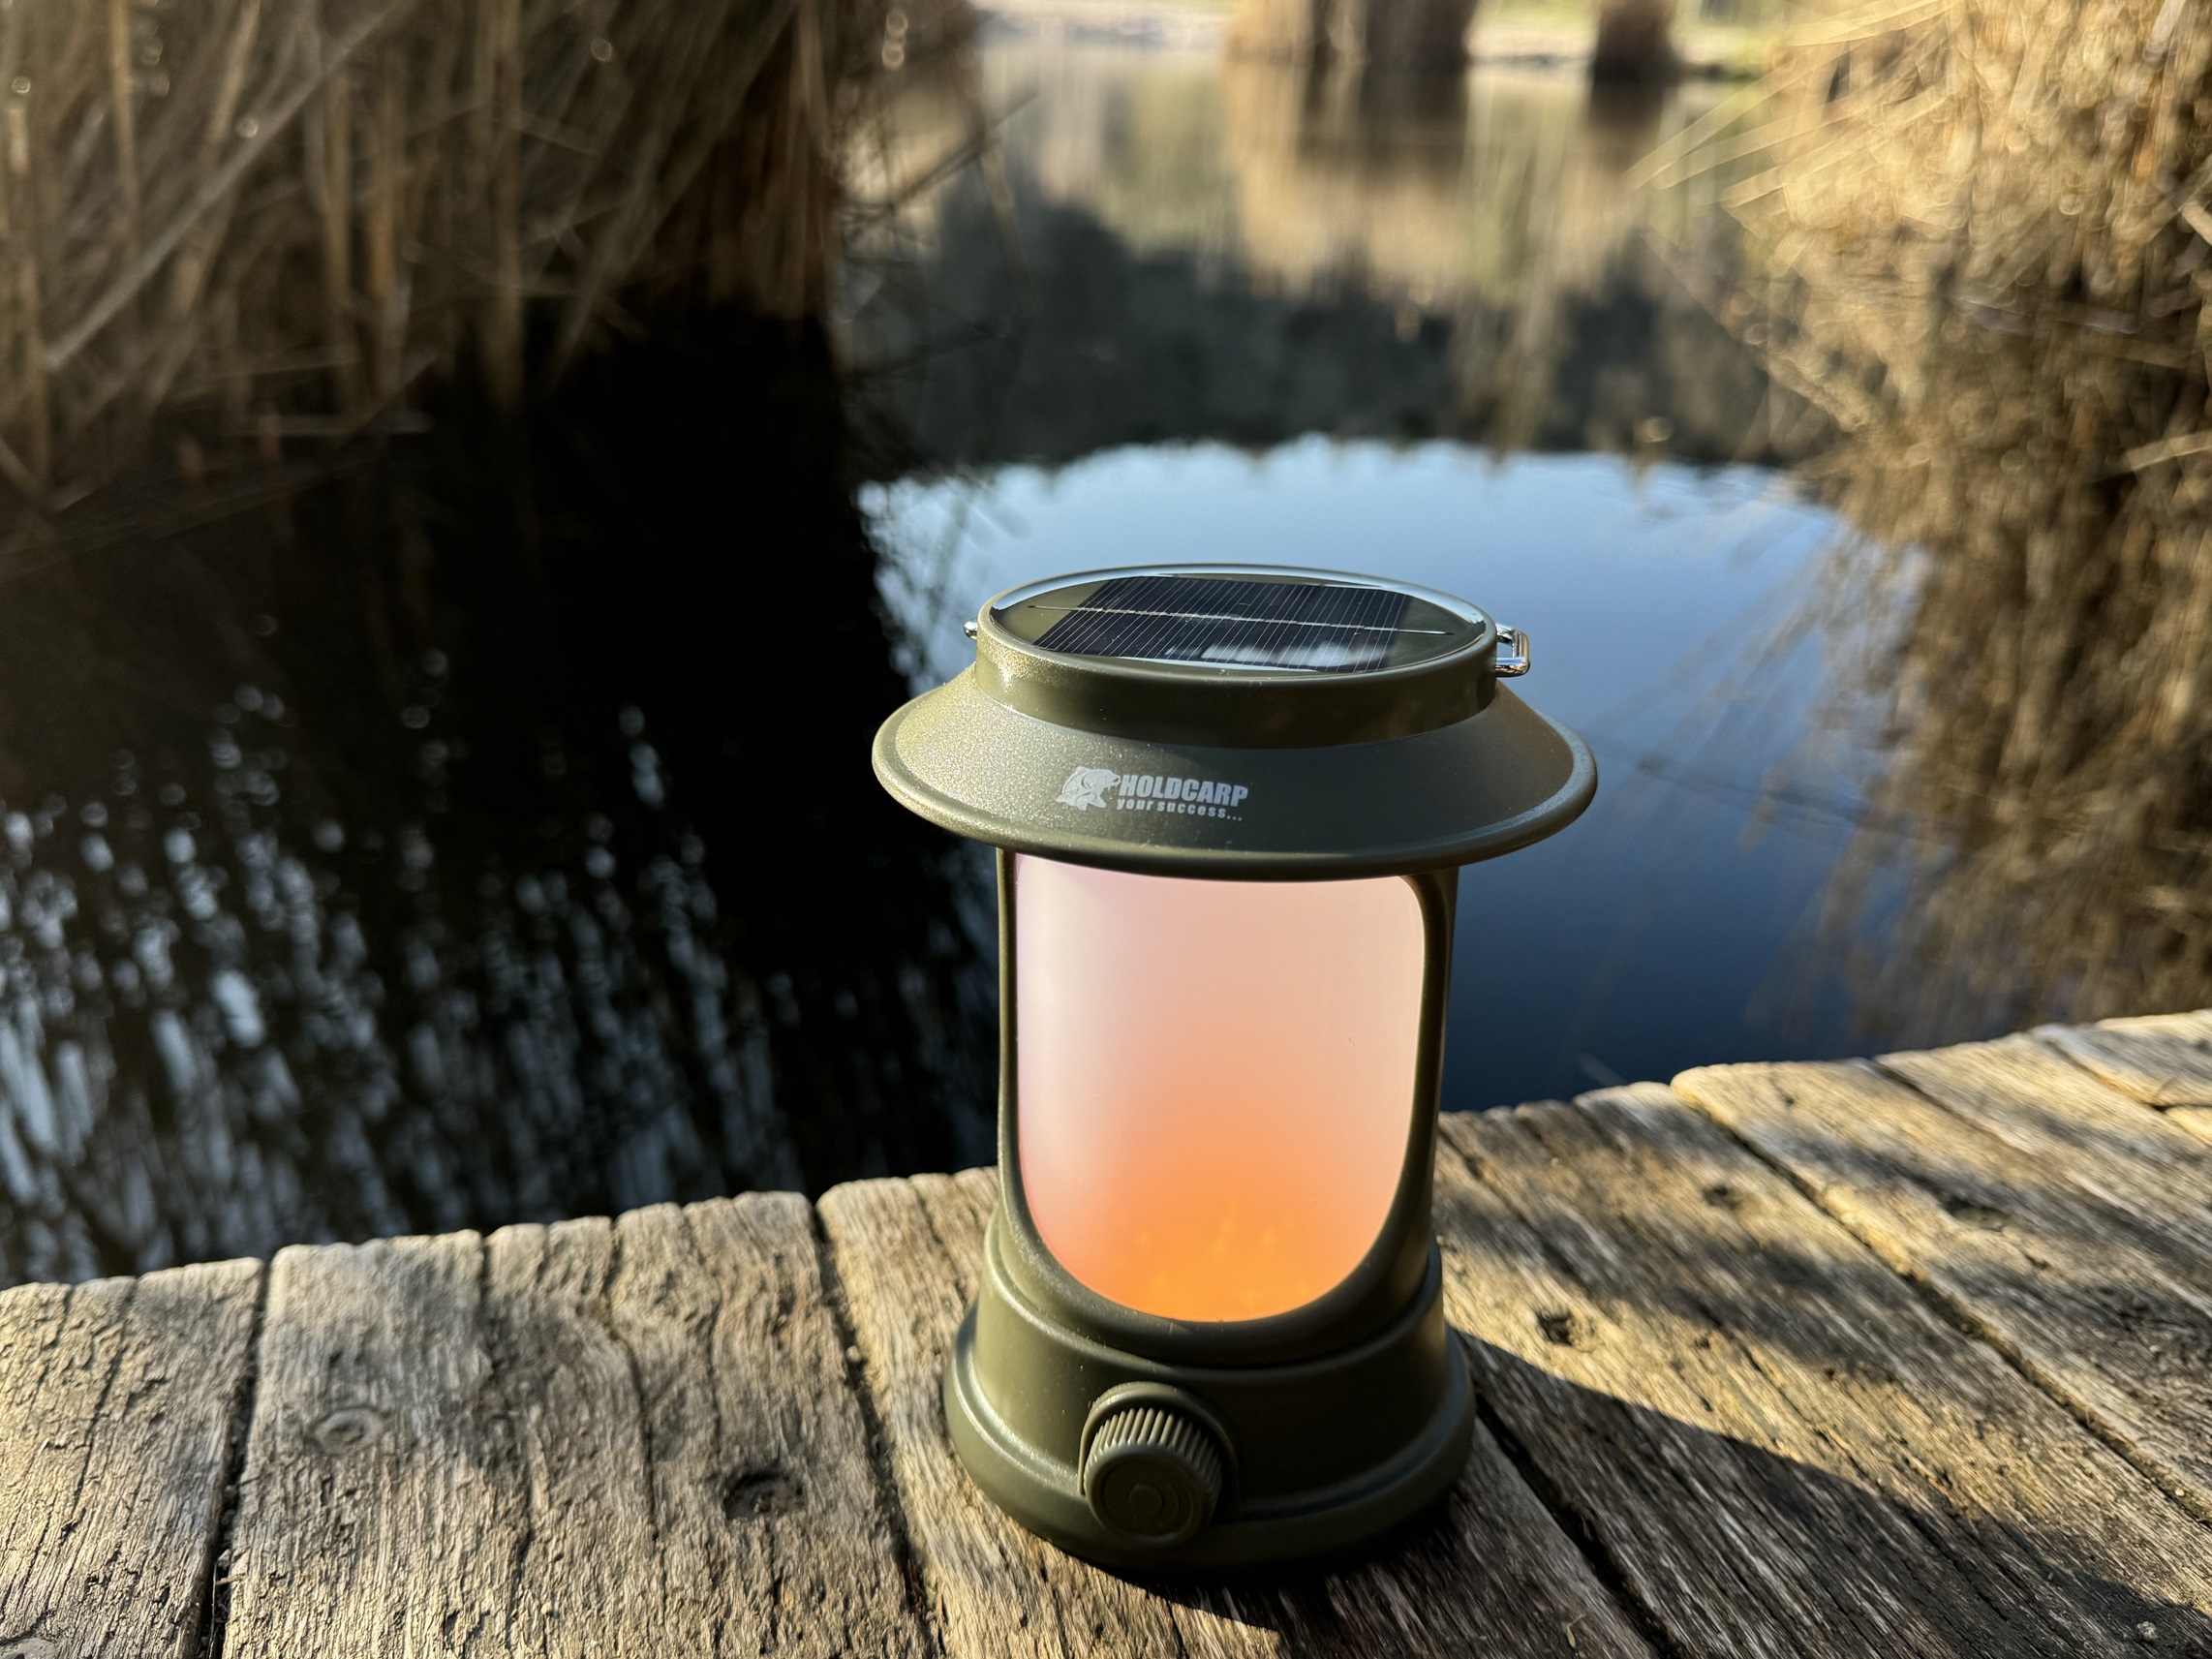 Holdcarp Solar Lamp (Rechargeable with Solar Energy)